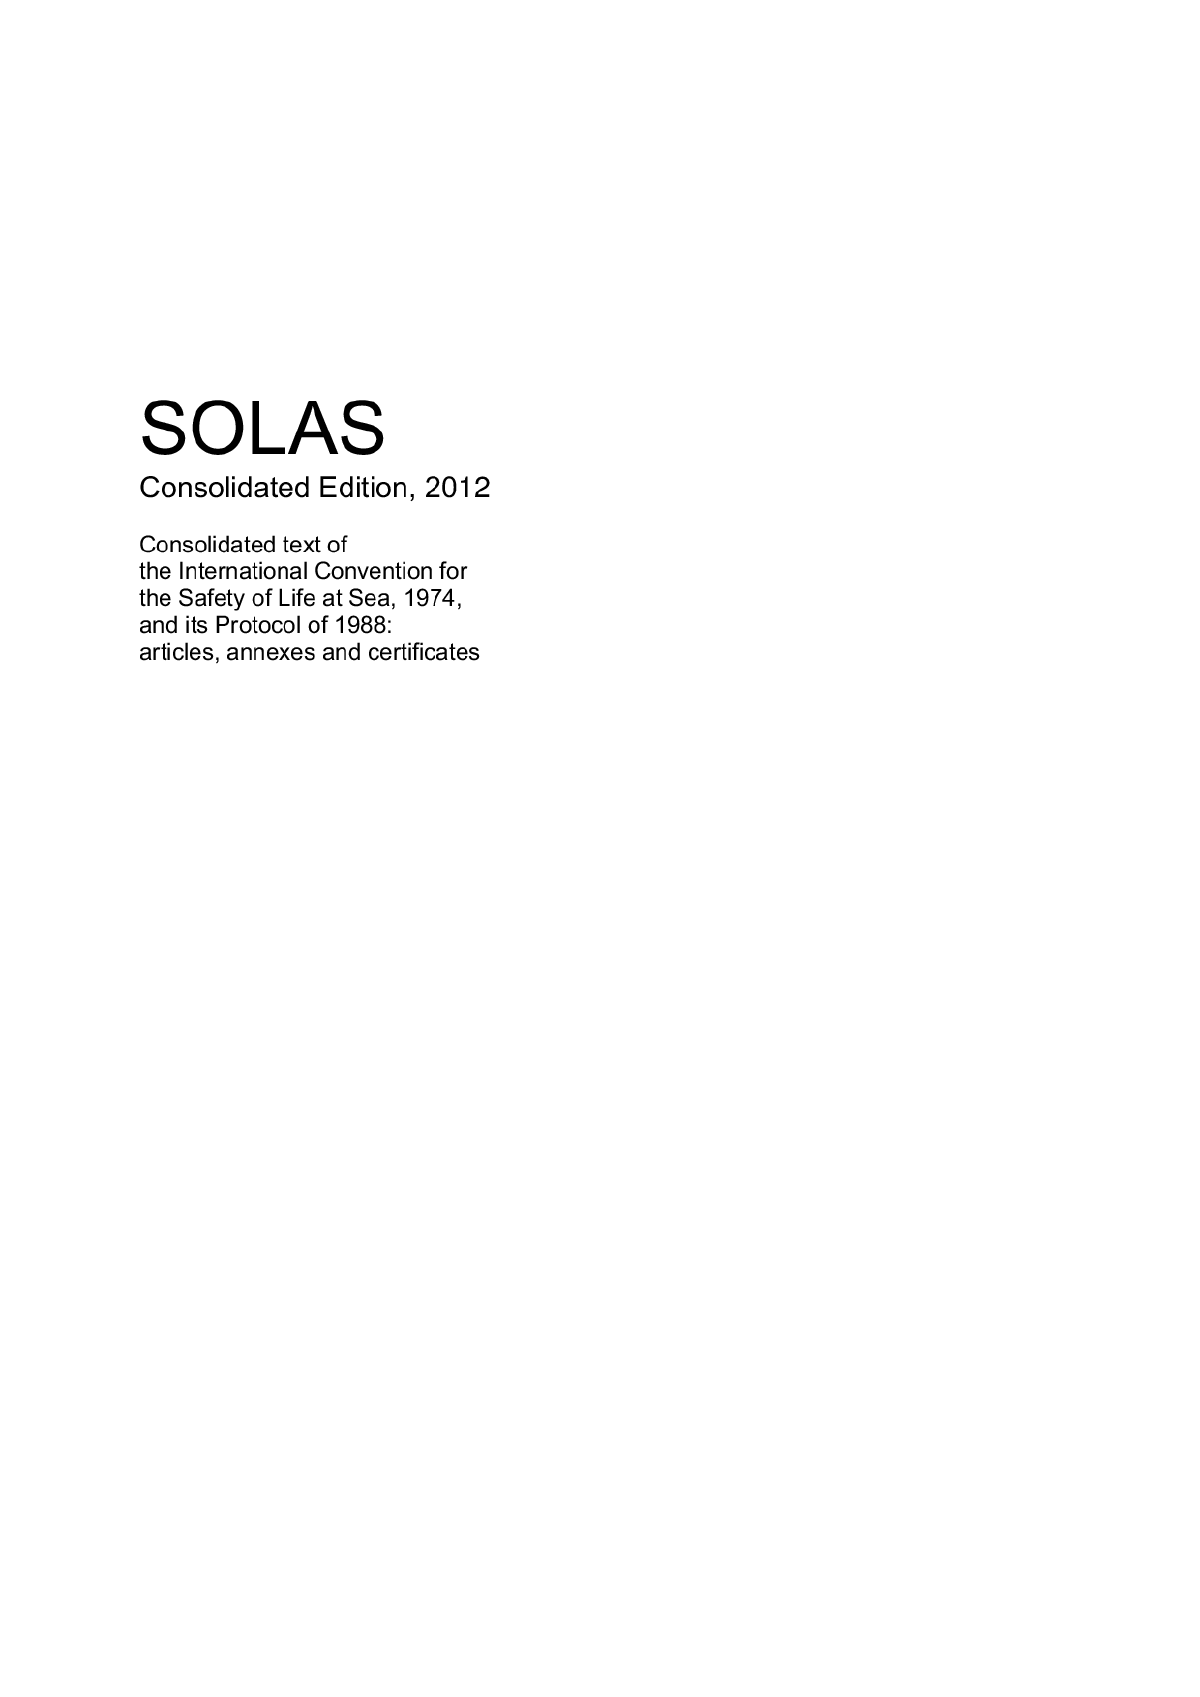 SOLAS Consolidated Edition 2012